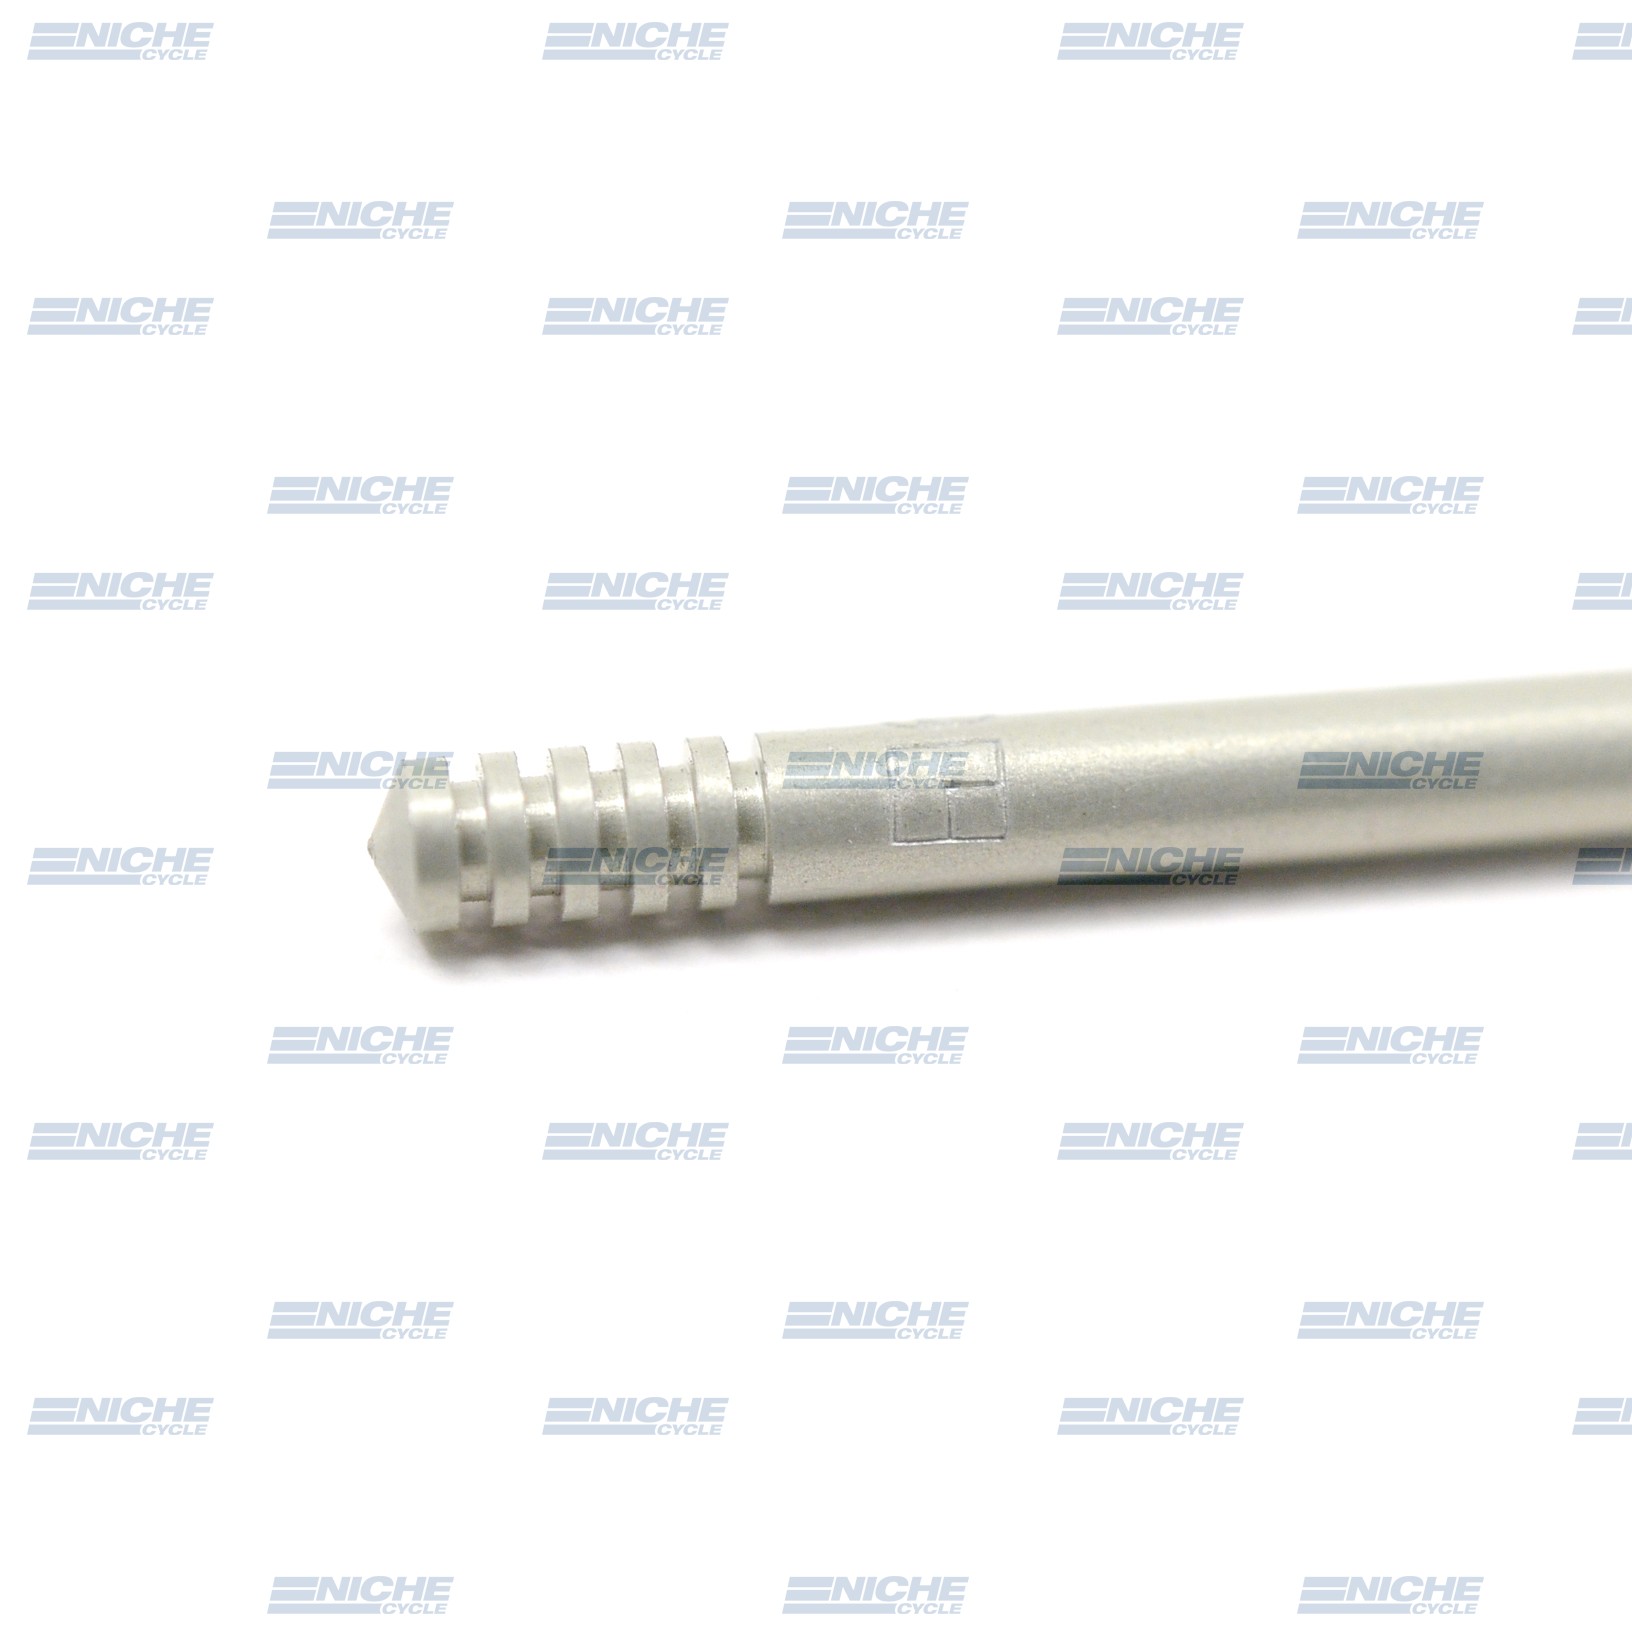 Genuine Genuine Mikuni Size Jet Needle 6DP7 Sold Individually by Niche Cycle Supply